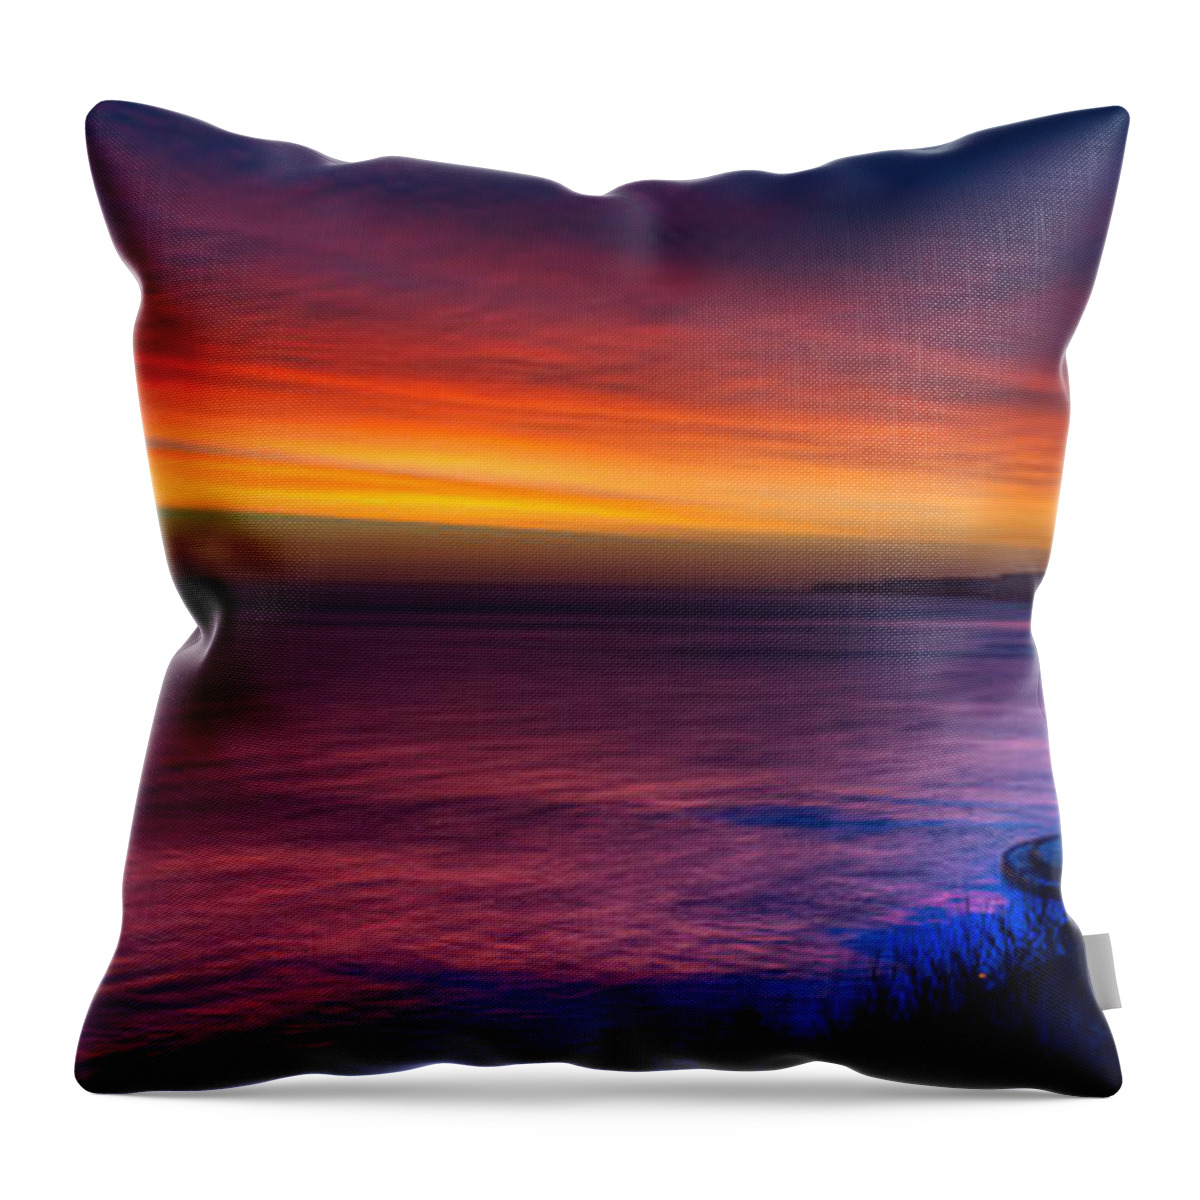 Europe Throw Pillow featuring the photograph A Bright Colored Sunrise Panoramic at Scarborough UK by Dennis Dame